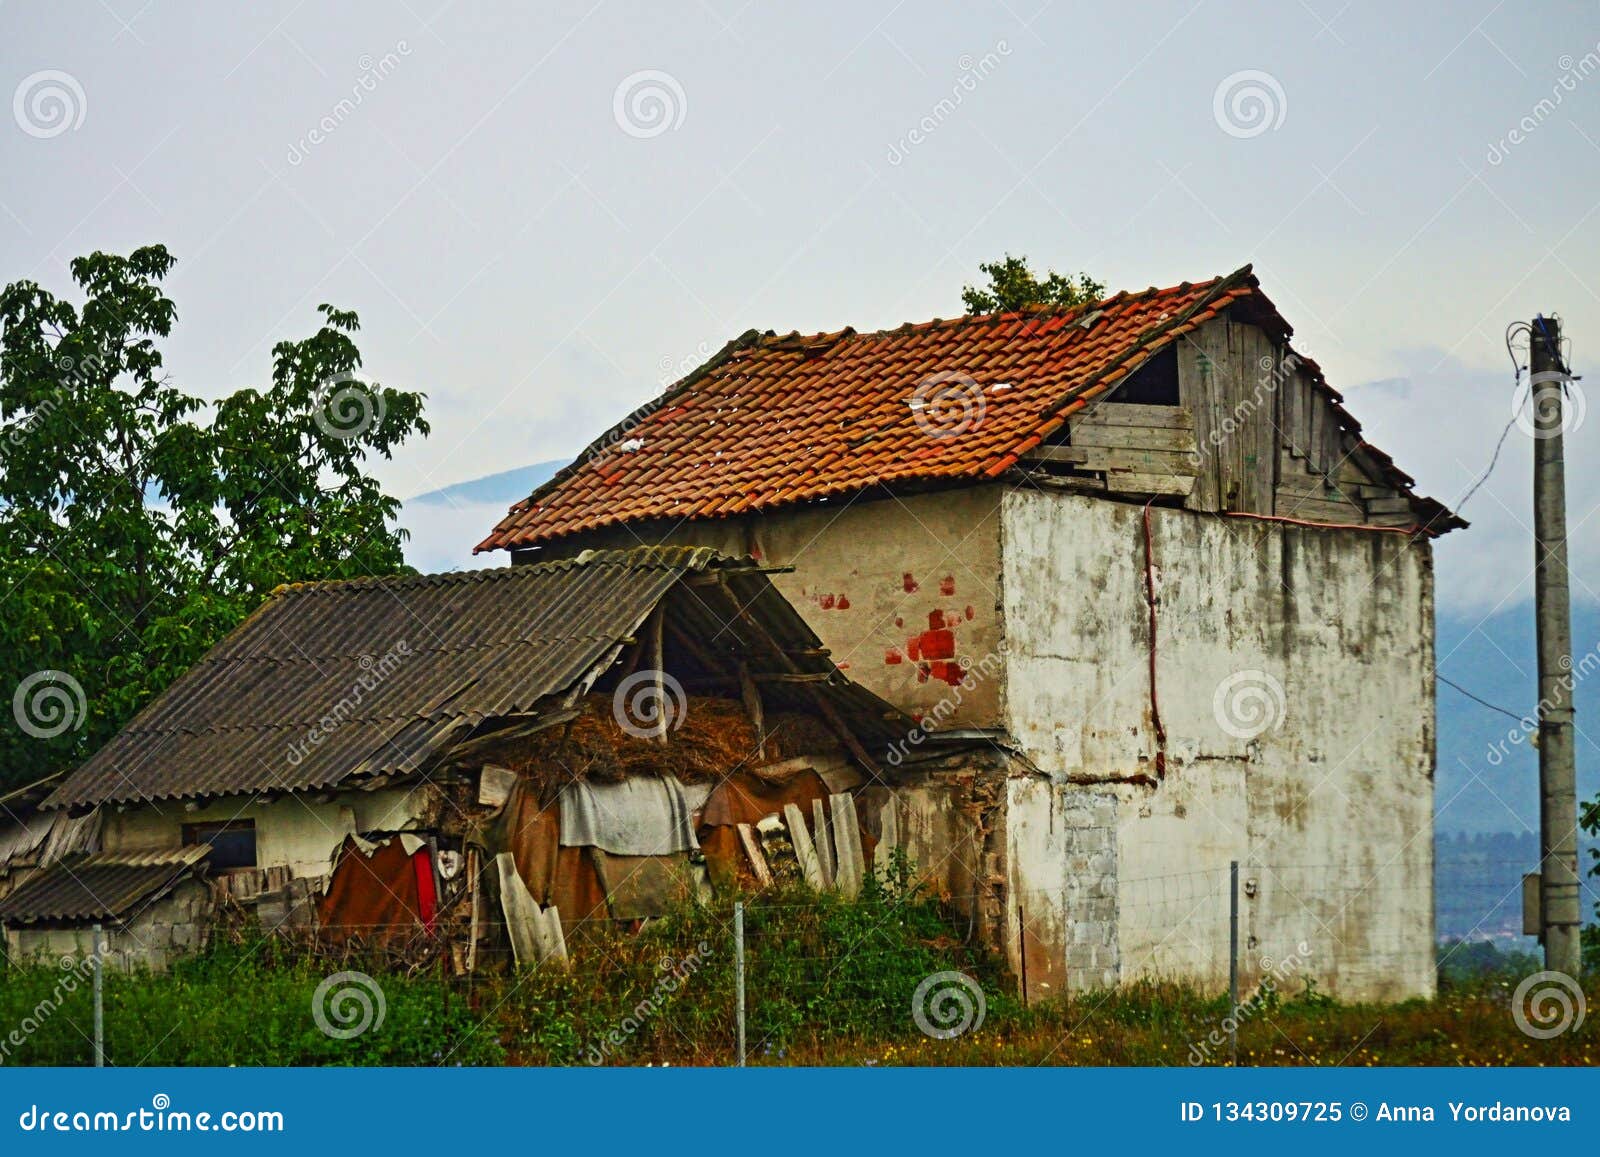 An Old Barn in the Serbian Balkan Mountains Stock Image - Image of ...